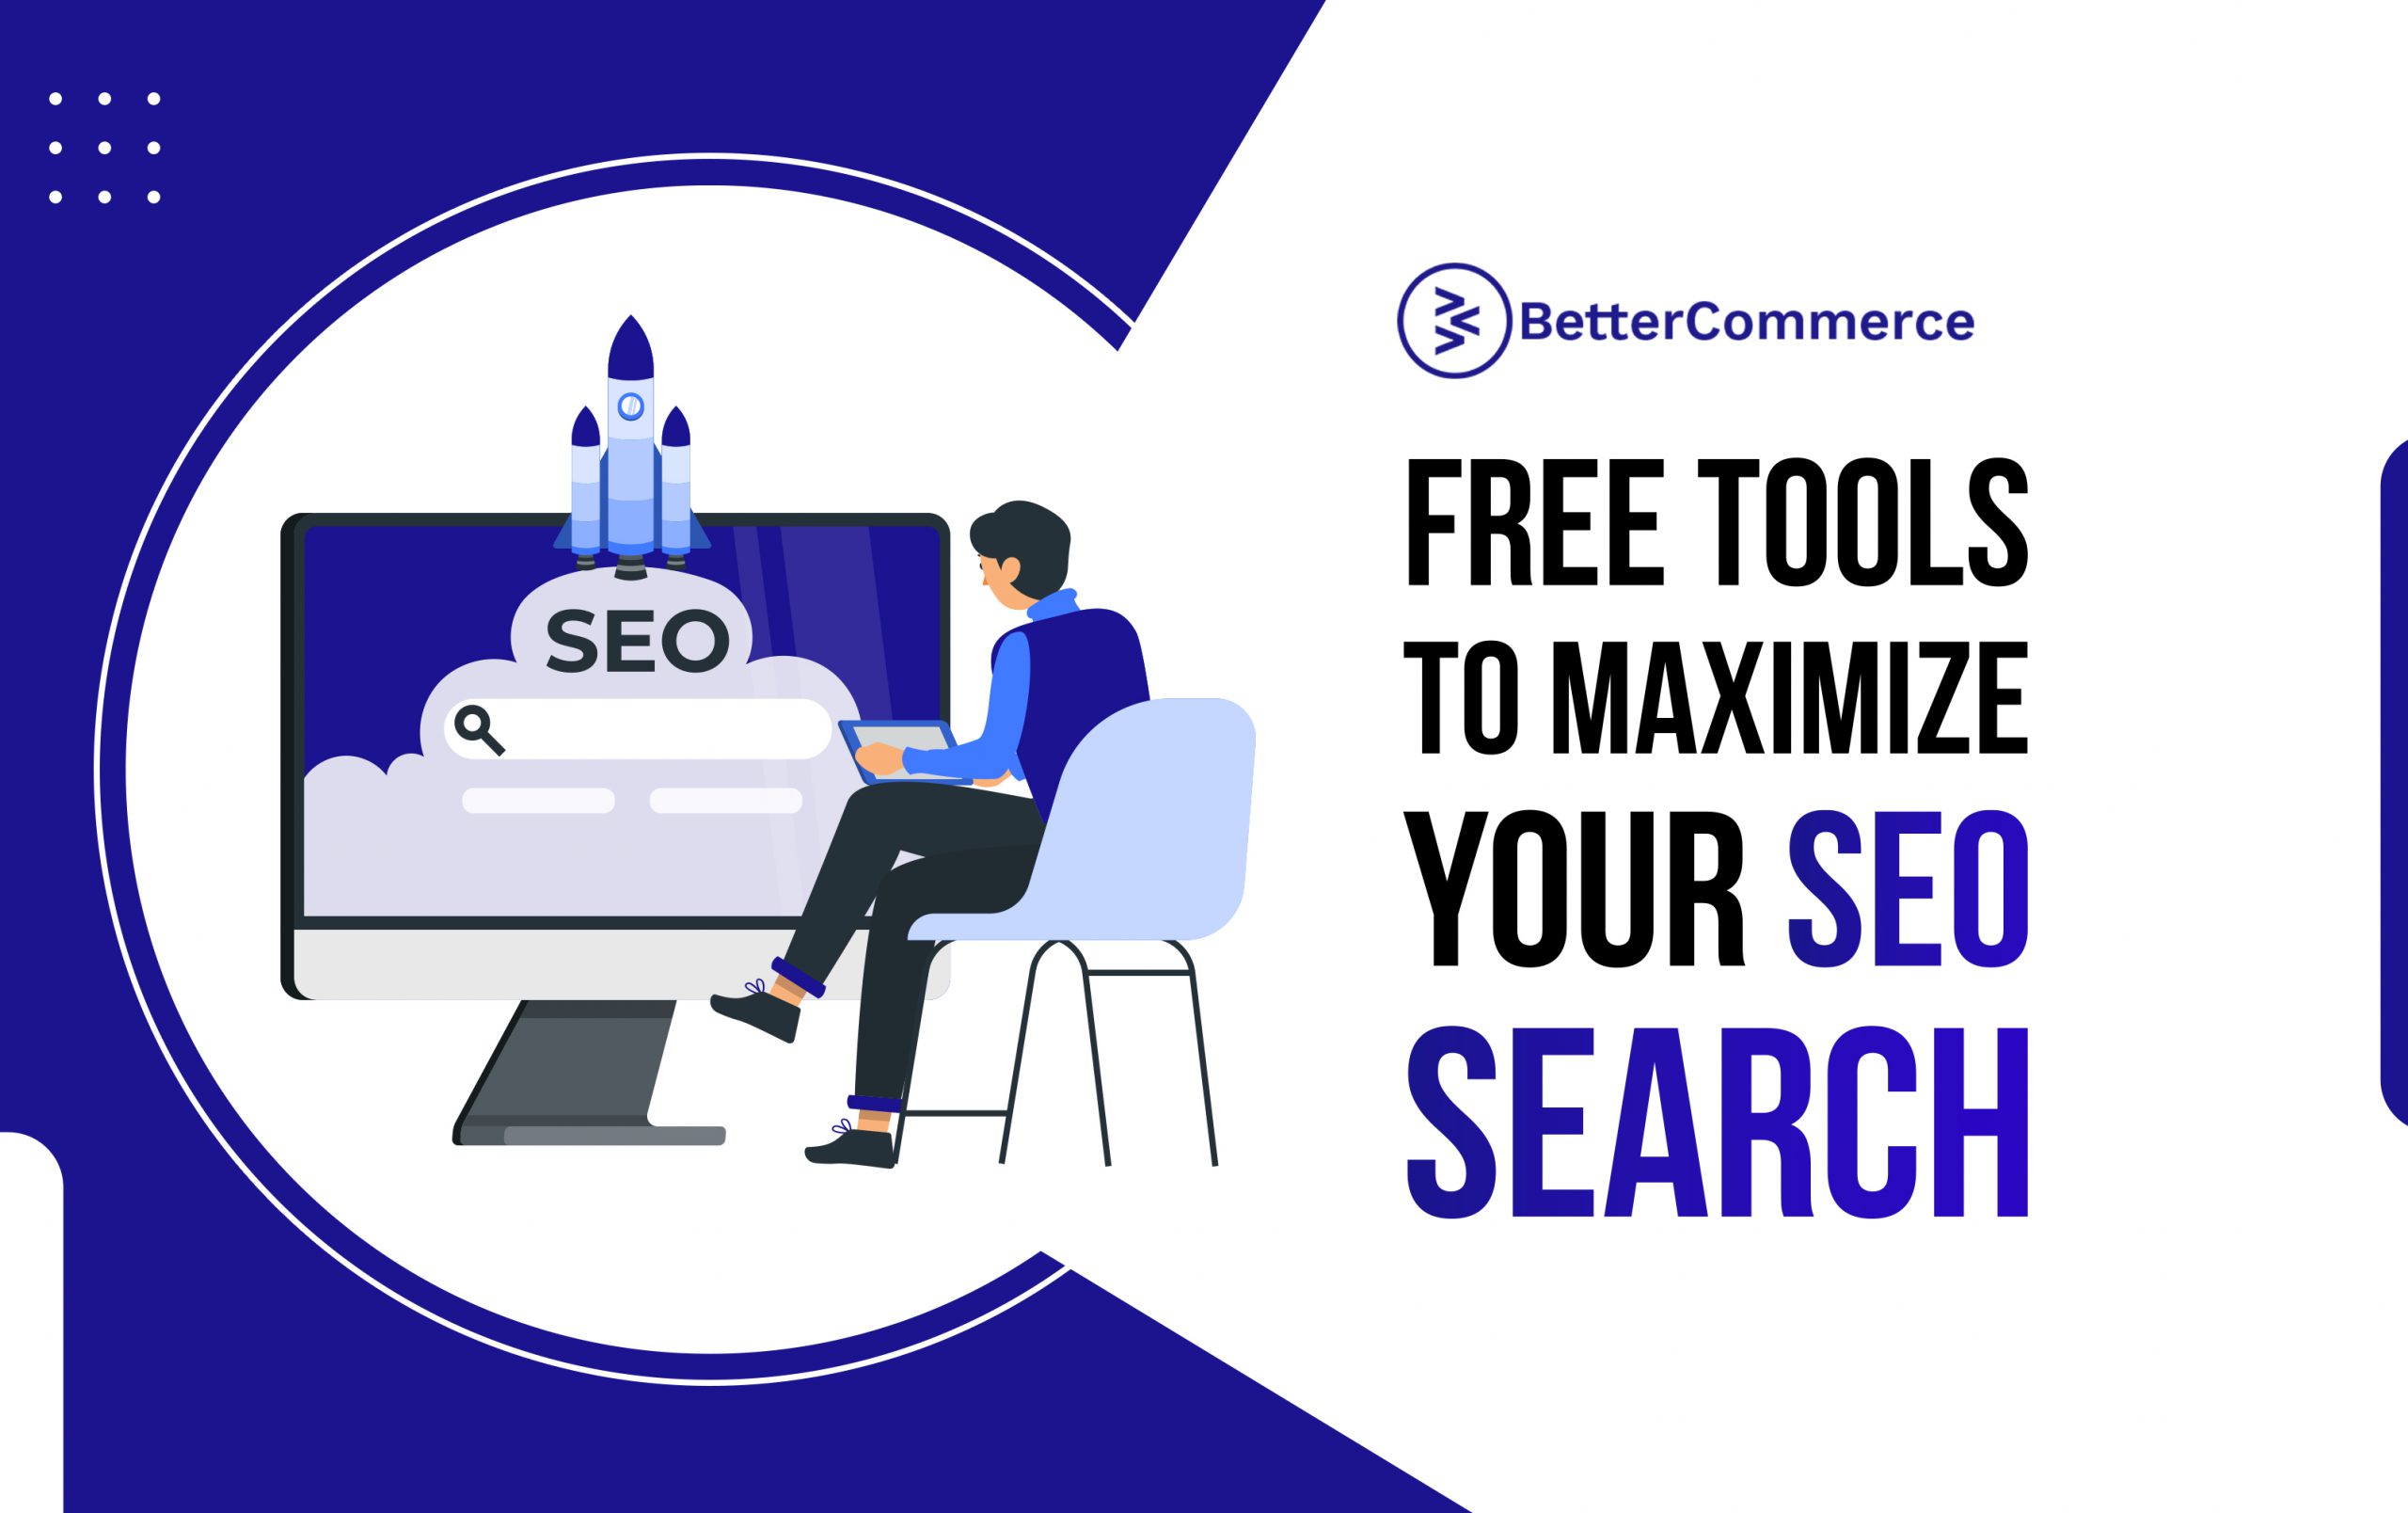 Free SEO Tools To Maximize Your SEO Search